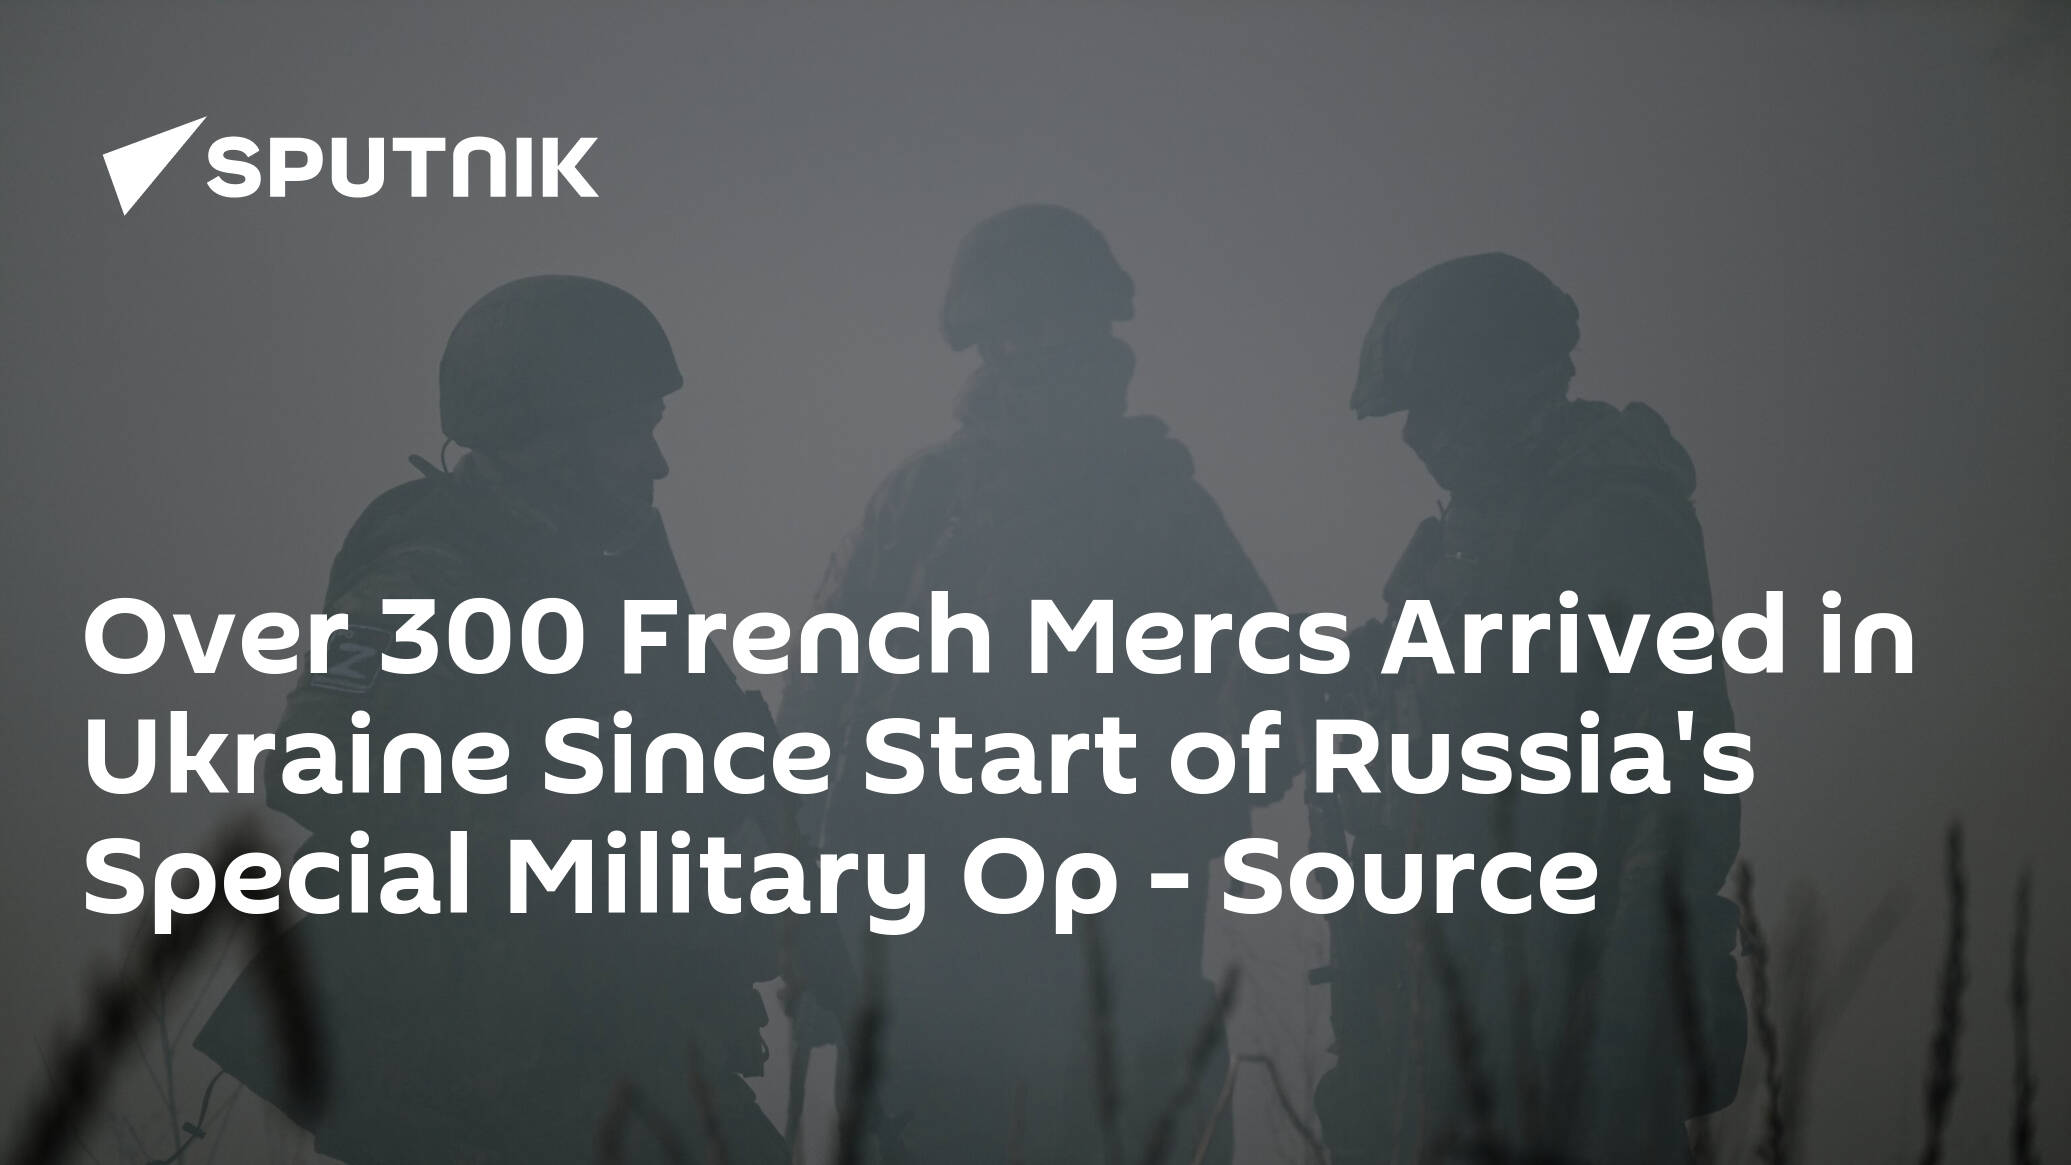 Over 300 French Mercs Arrived in Ukraine Since Start of Russia's Special Military Op – Source